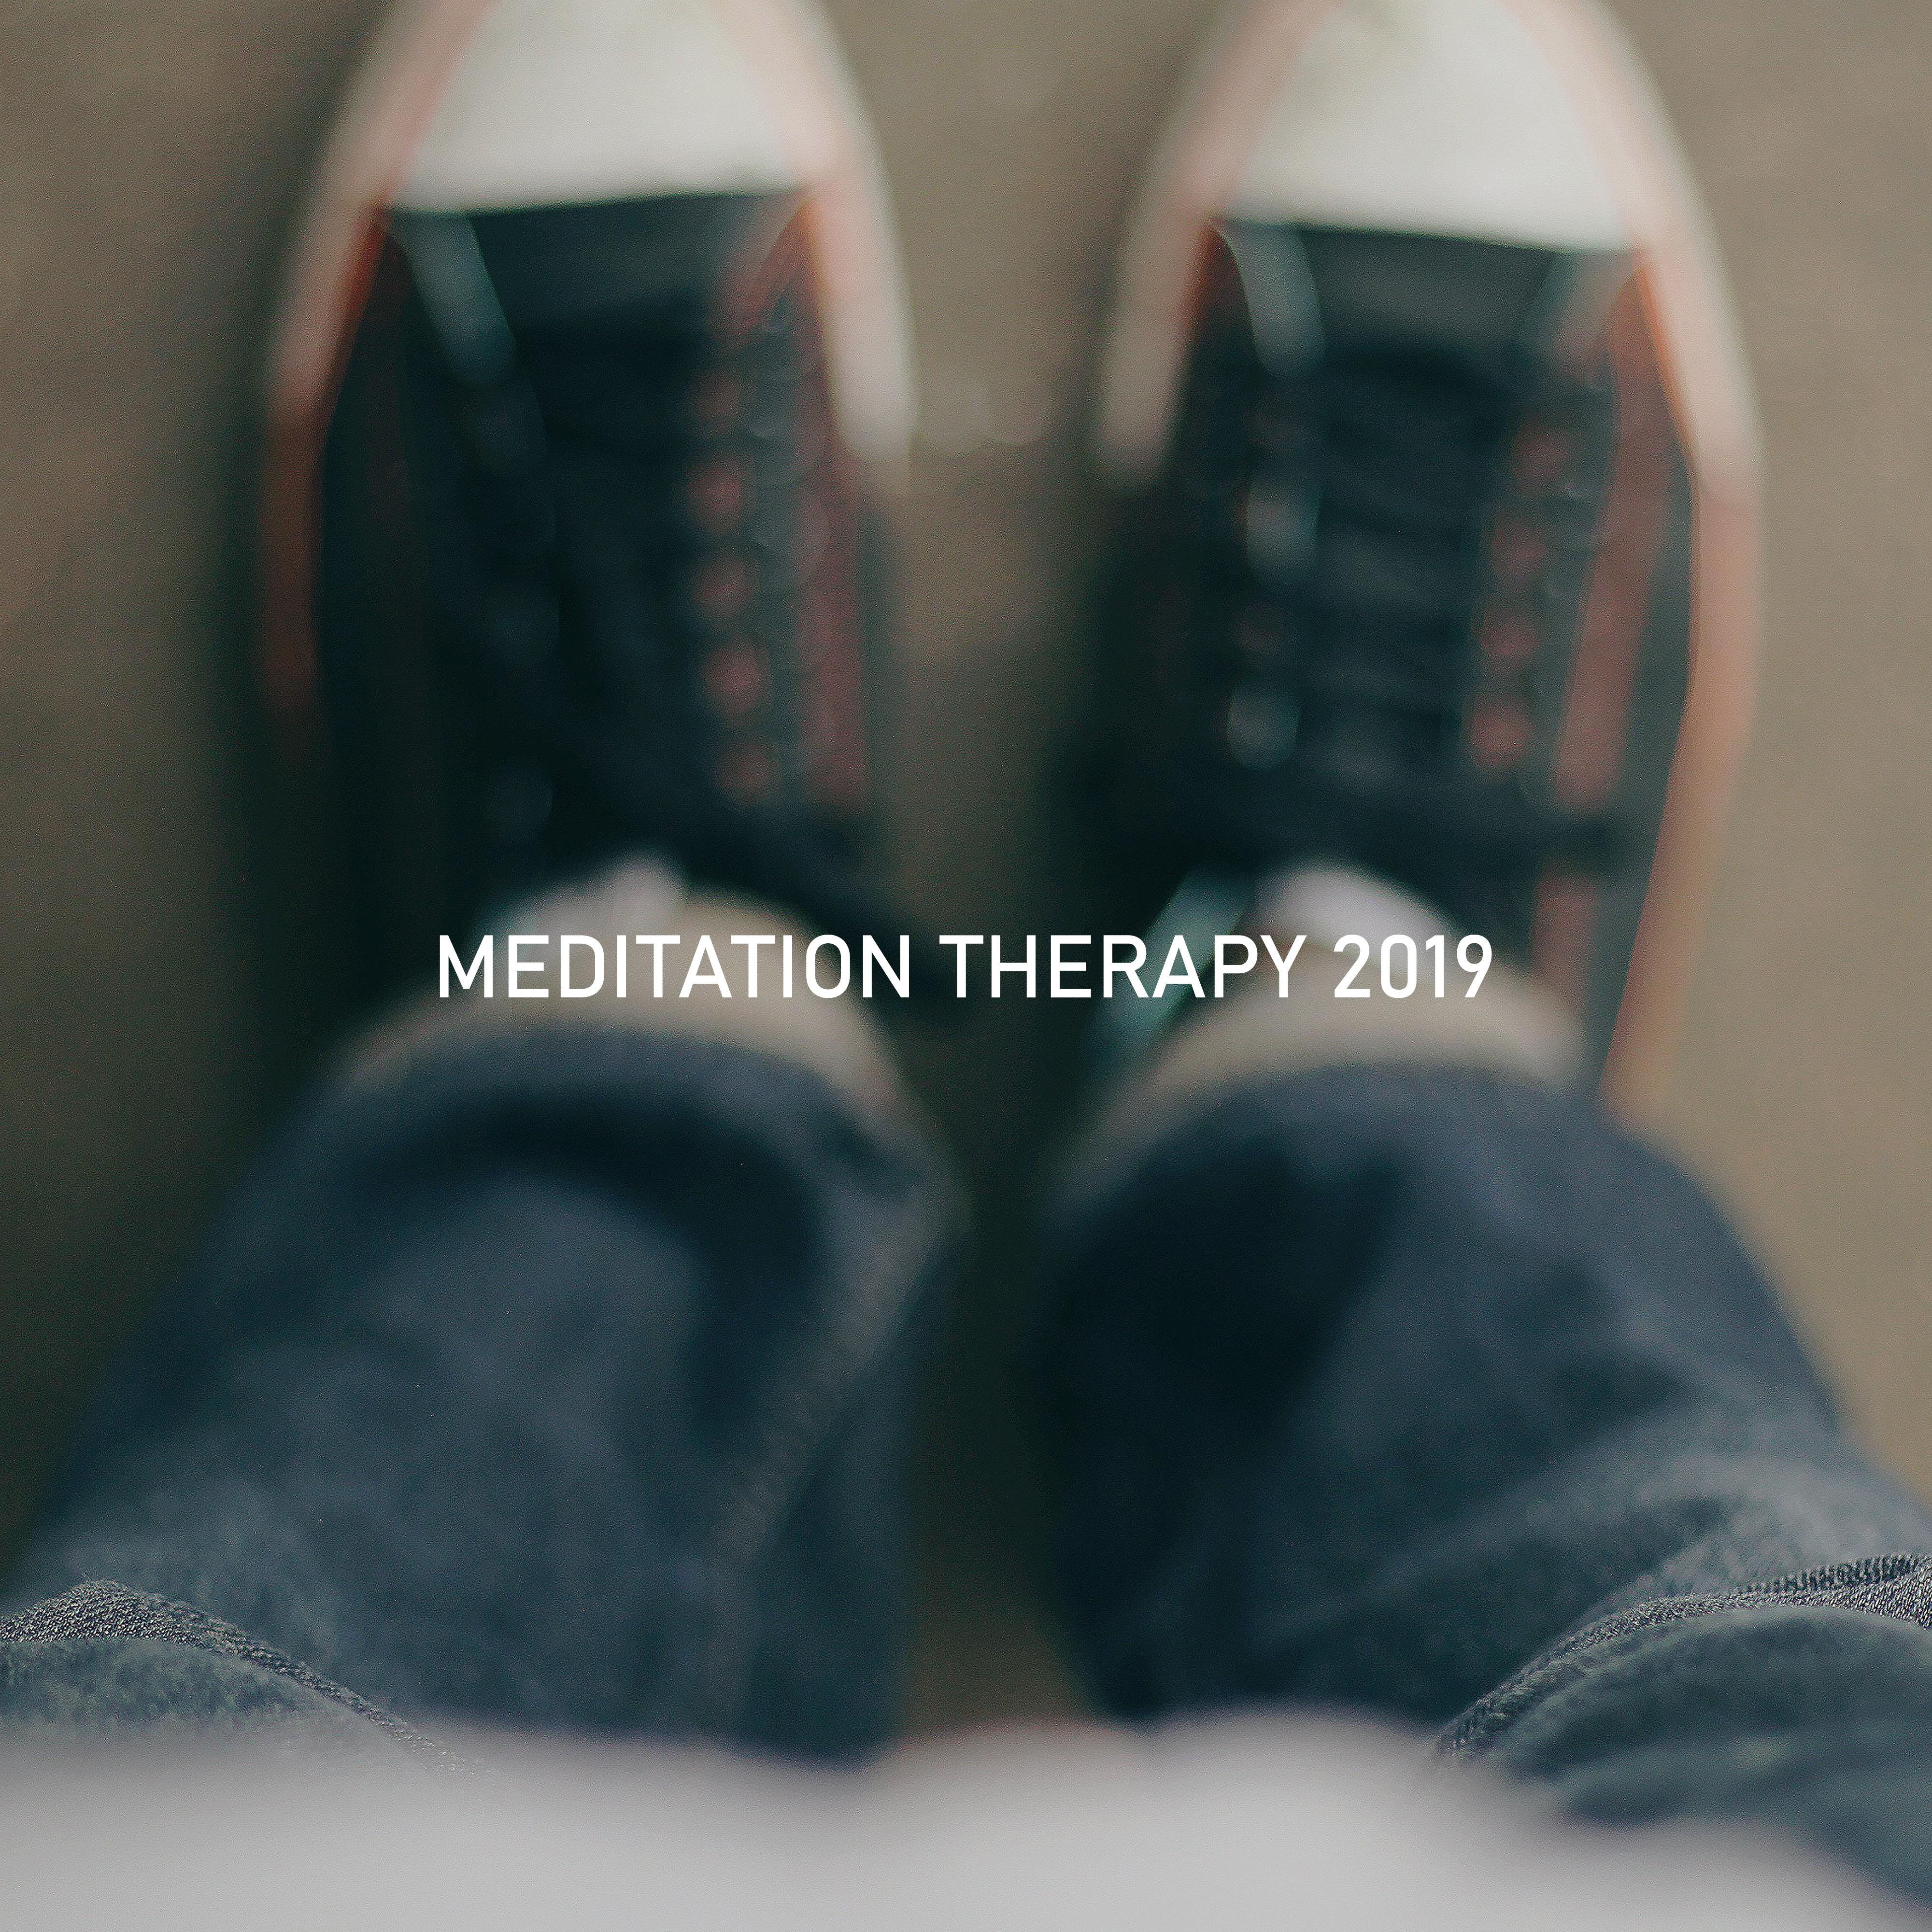 Meditation Therapy 2019: Healing Yoga for Relaxation, Zen, Lounge